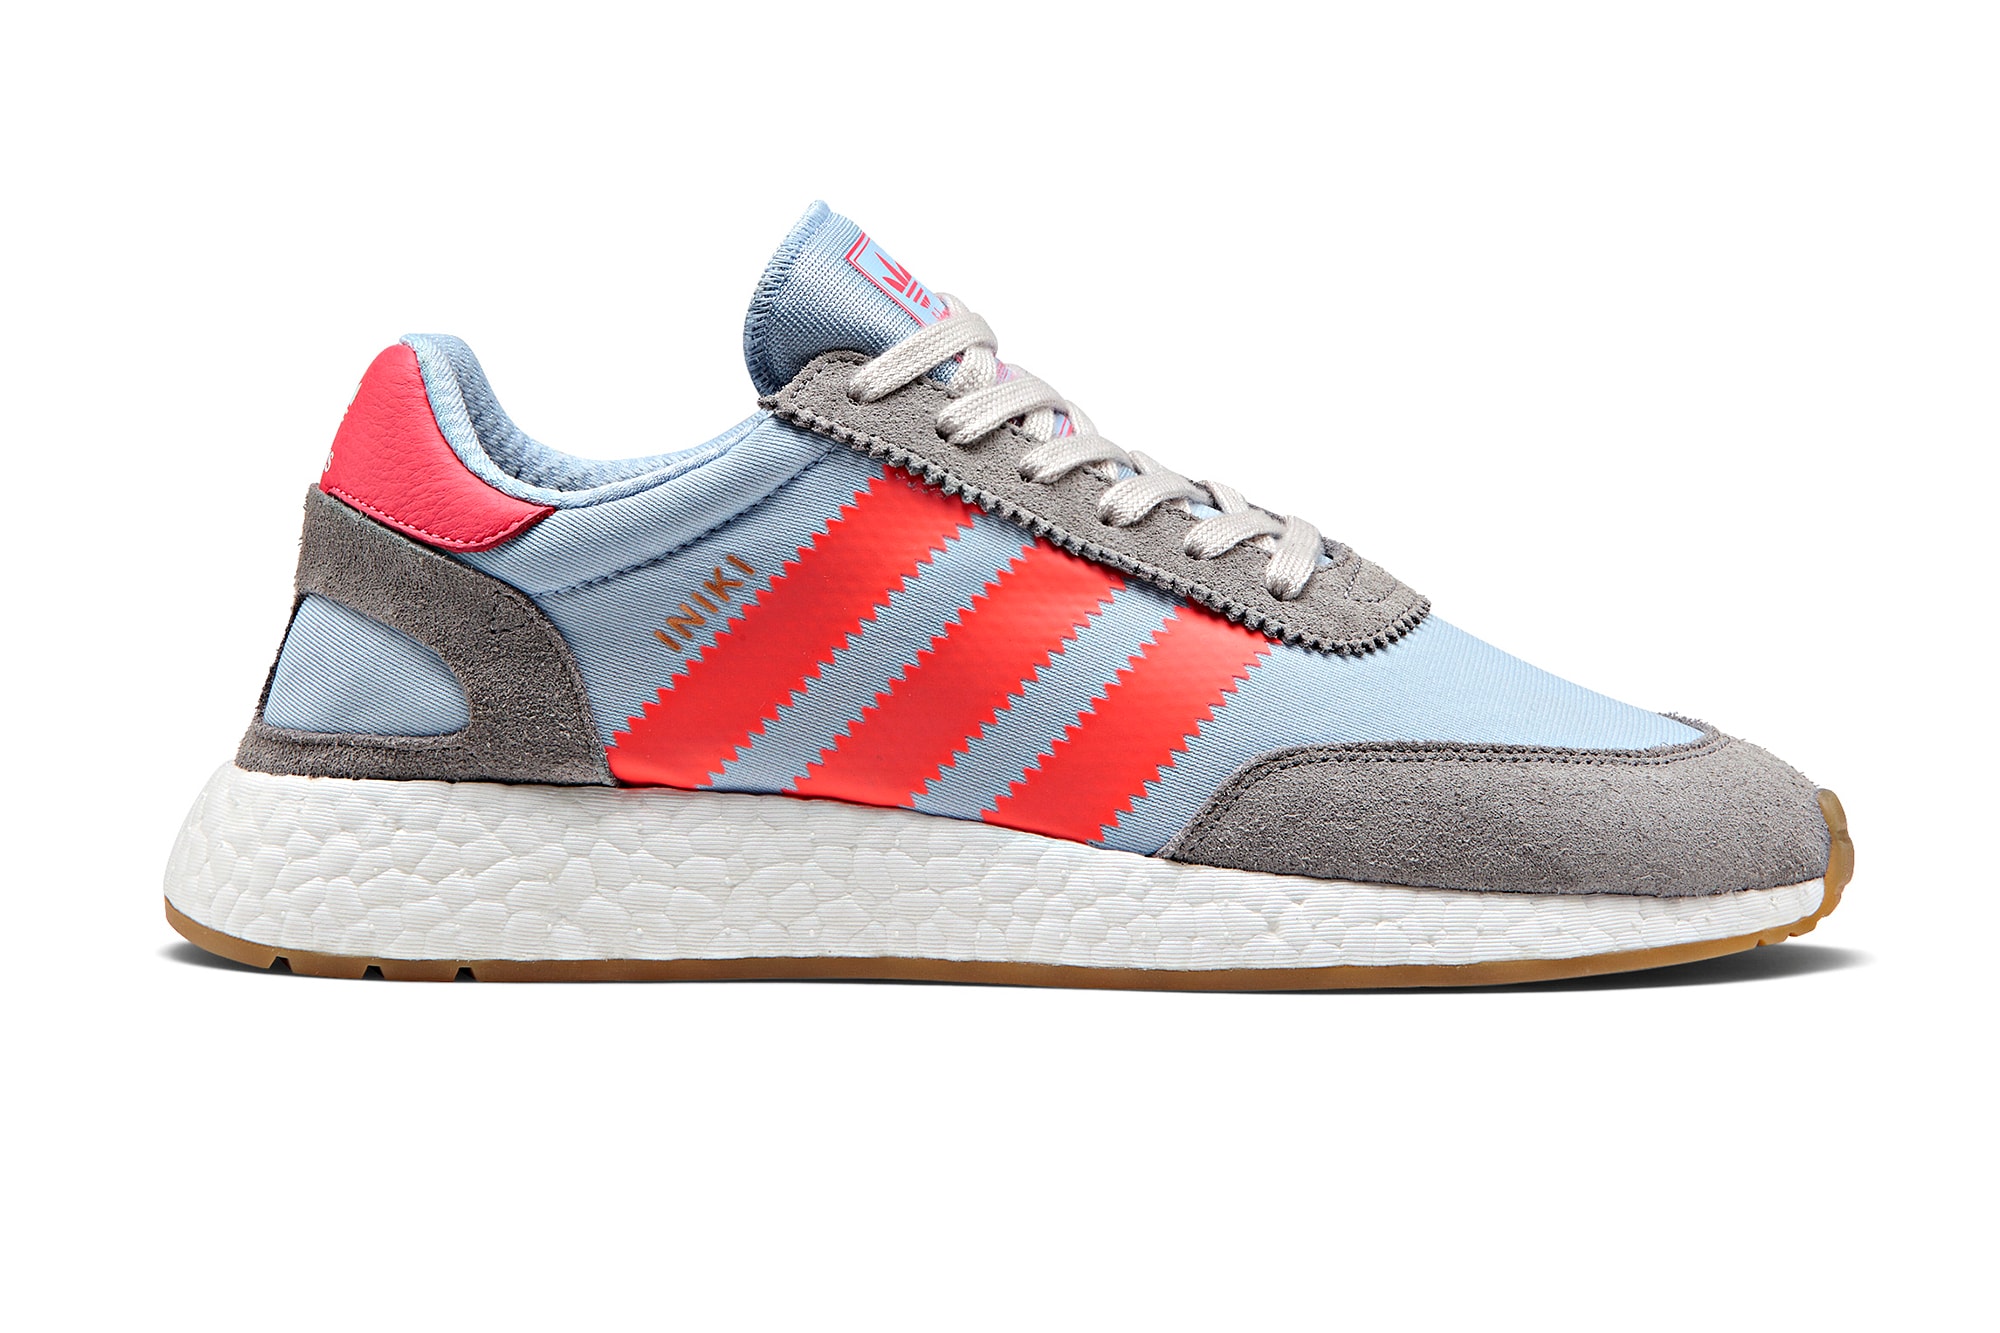 What do you guys think about this samba color way? : r/adidas